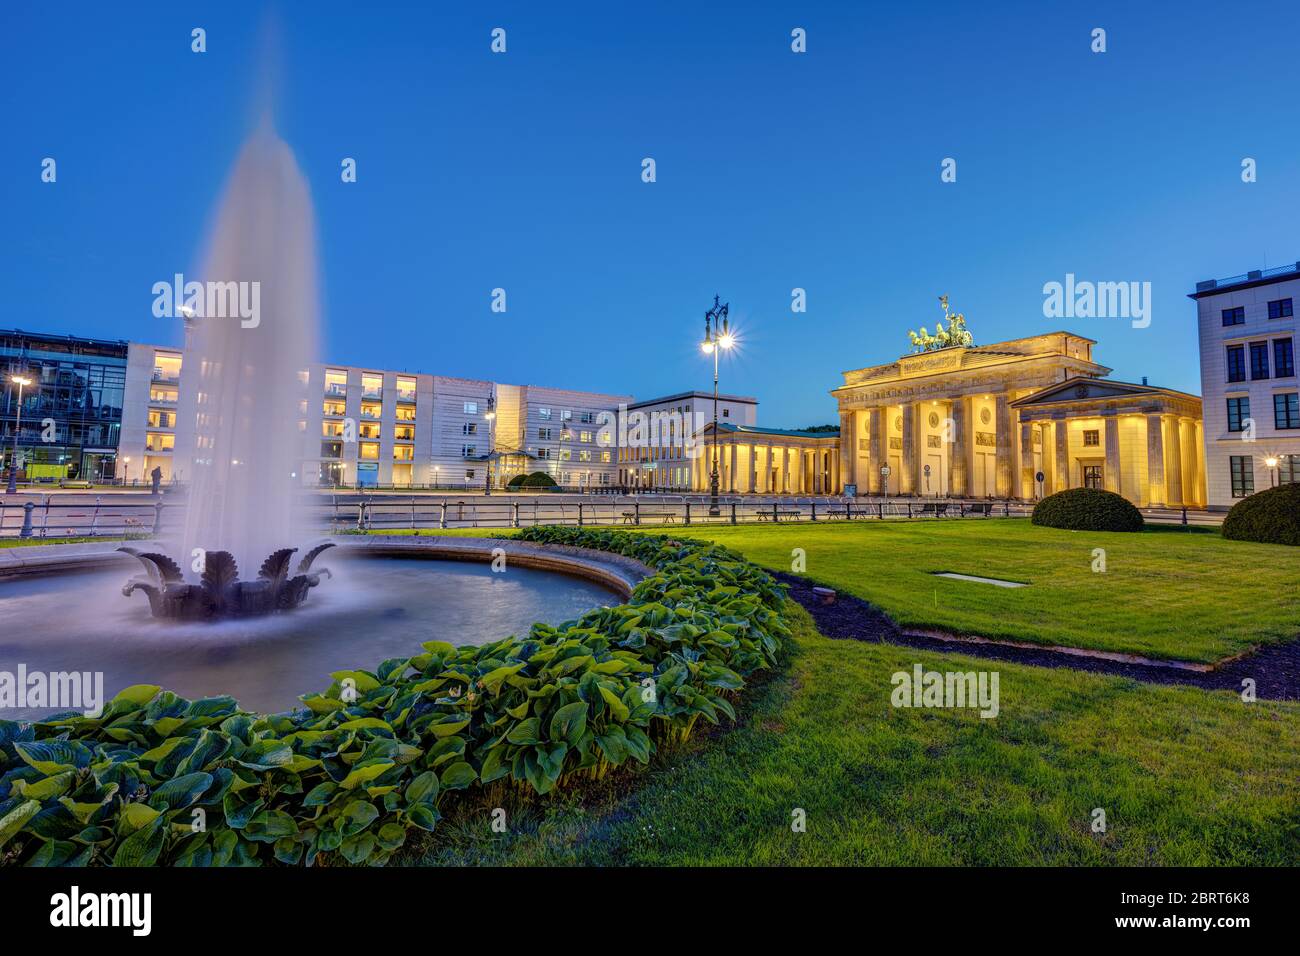 The illuminated Brandenburg Gate in Berlin at dusk with a fountain Stock Photo